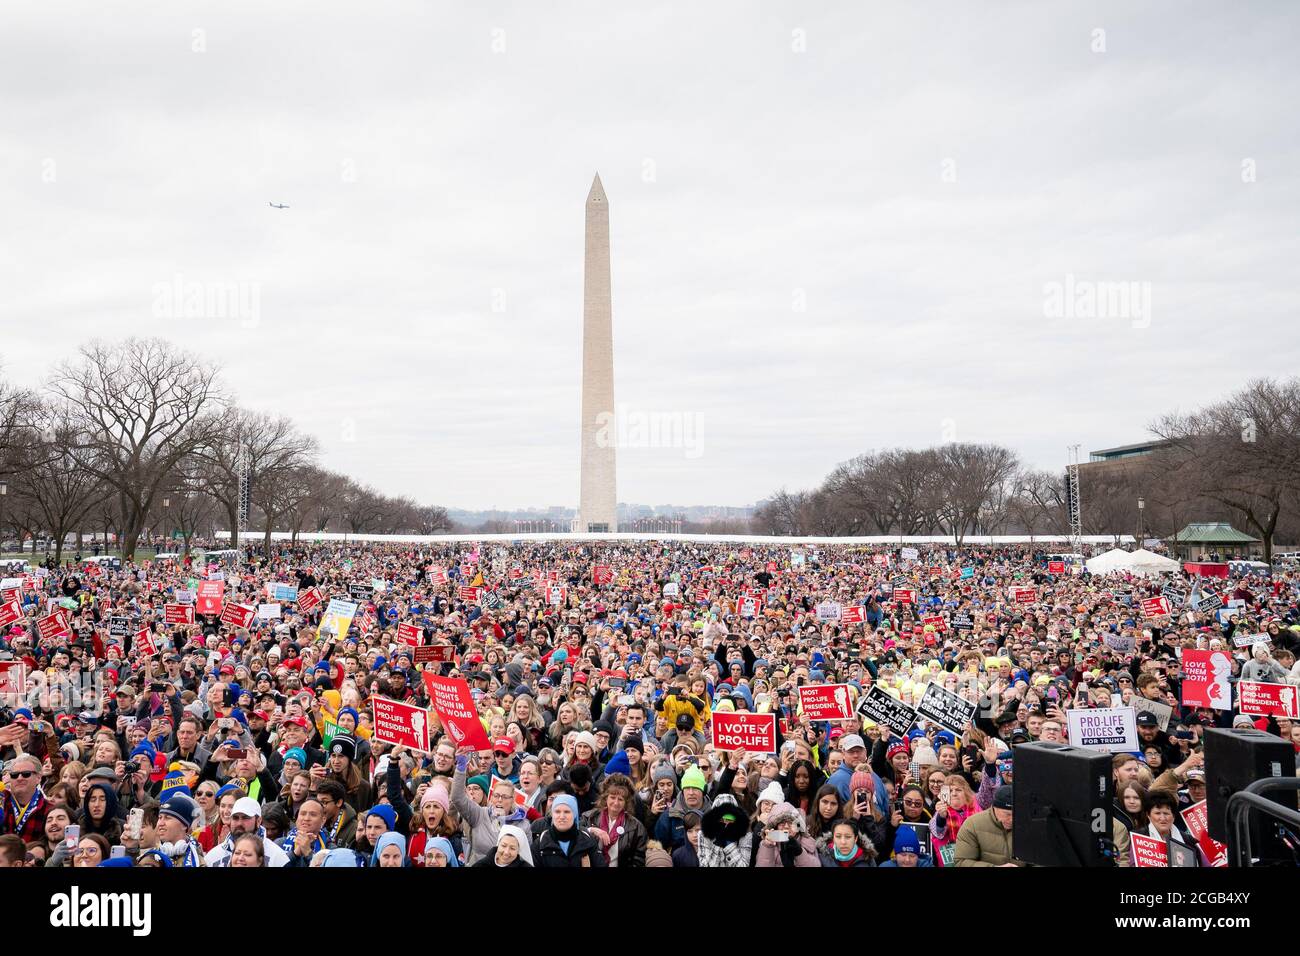 March for Life Gathering Freitag, 24. Januar 2020, in der National Mall in Washington, D.C., wo Präsident Donald Trump die Massen ansprach. (USA) Stockfoto